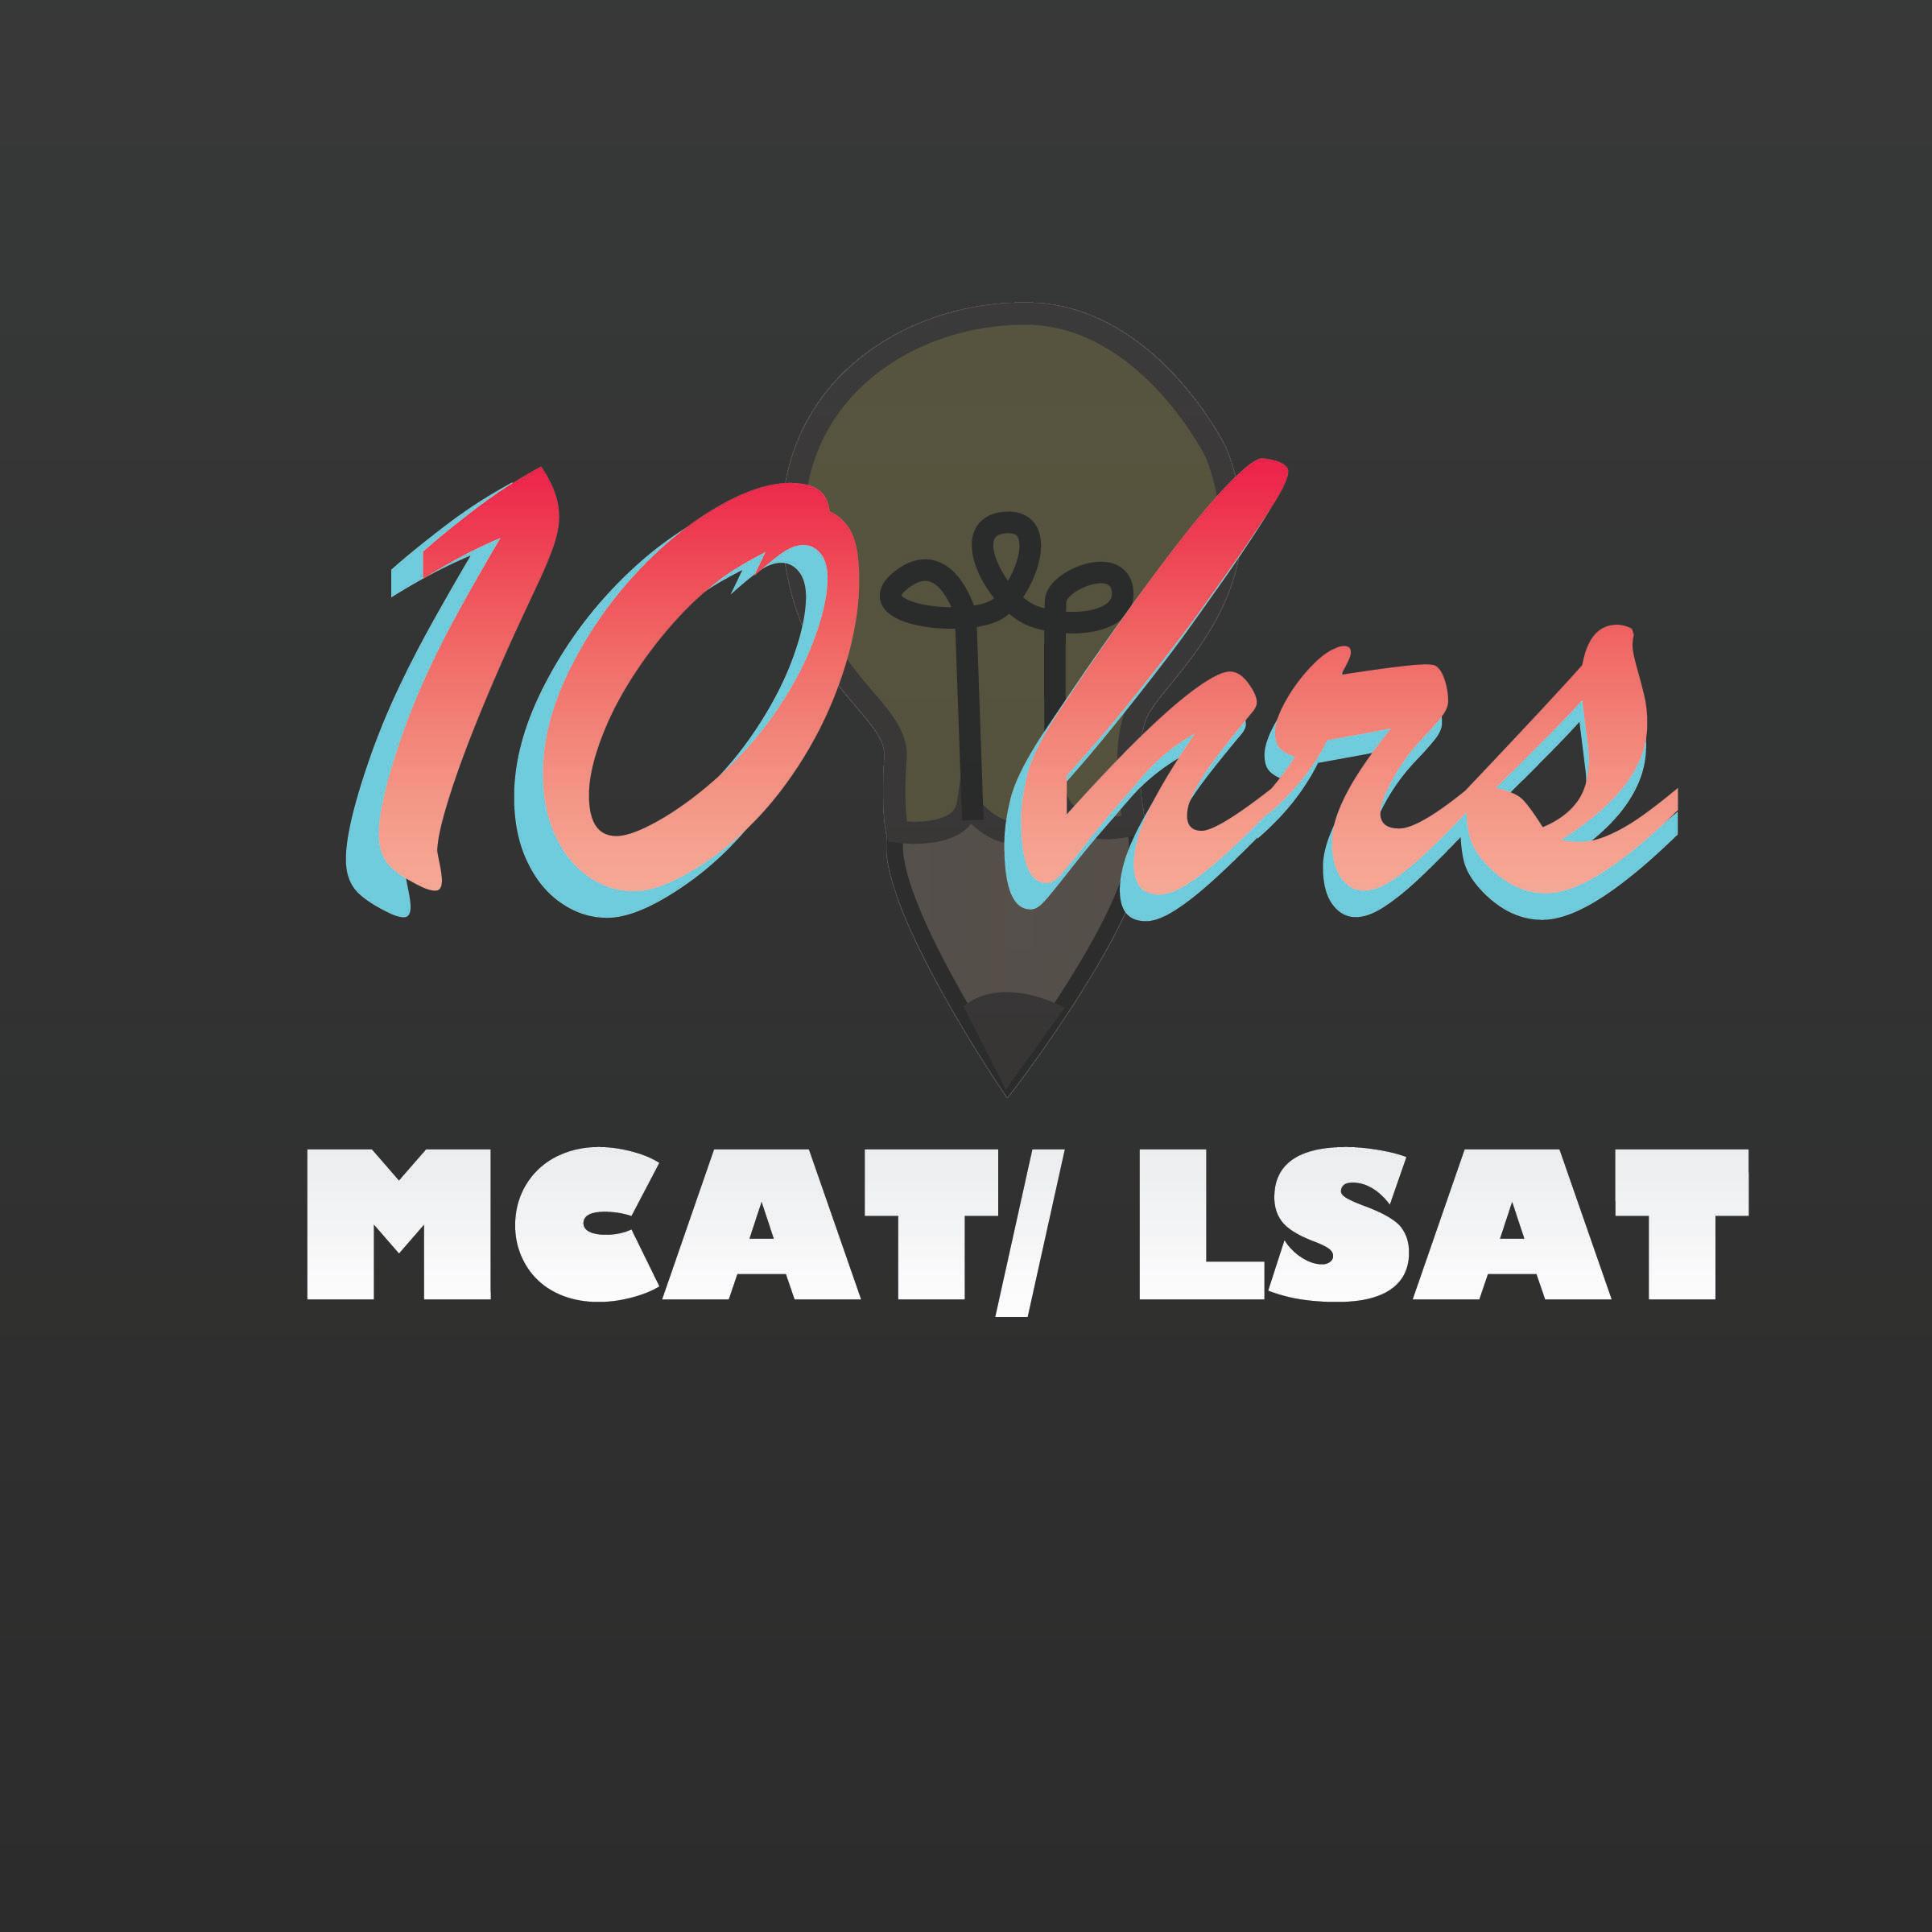 Product 10 Hours of MCAT/ LSAT Tutoring (1/2 Payment) - SoCal Study Buddies image